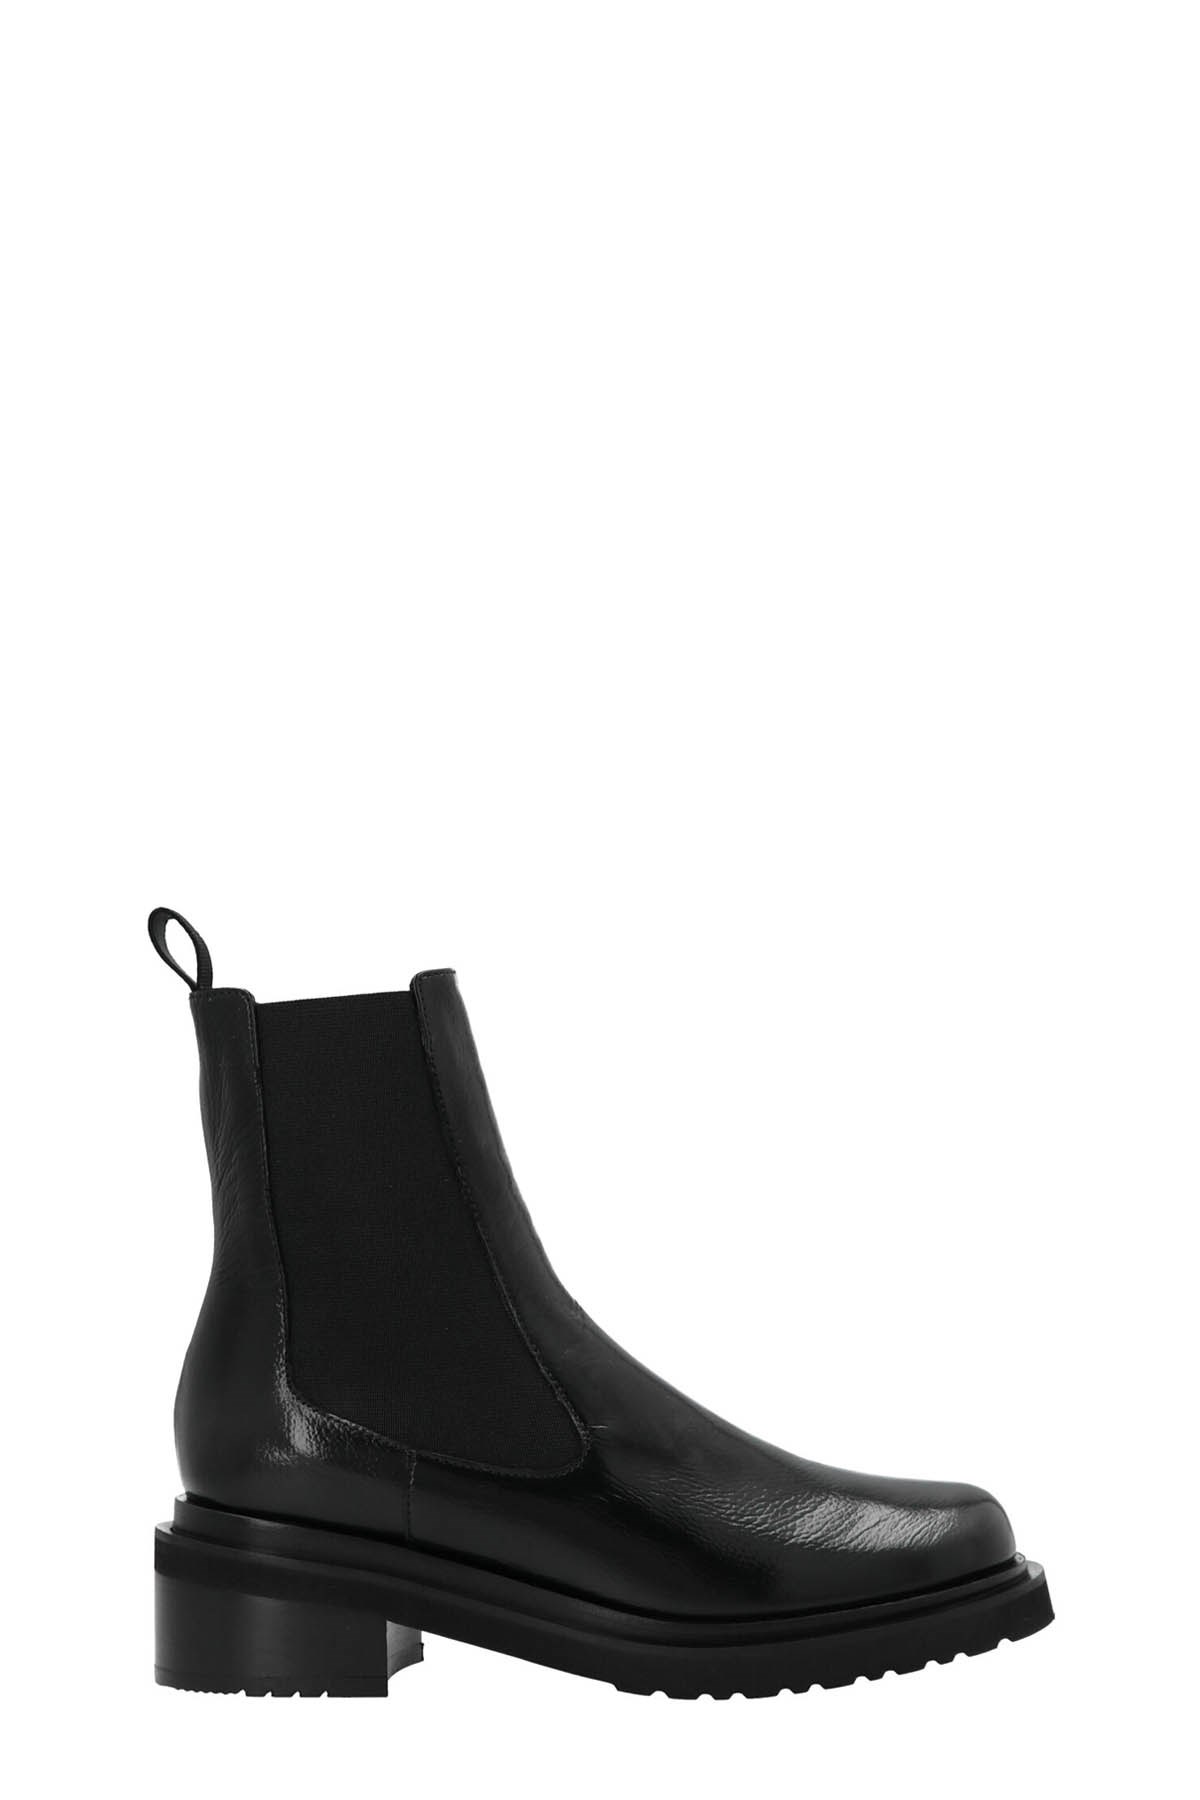 BY FAR 'Rika' Ankle Boot